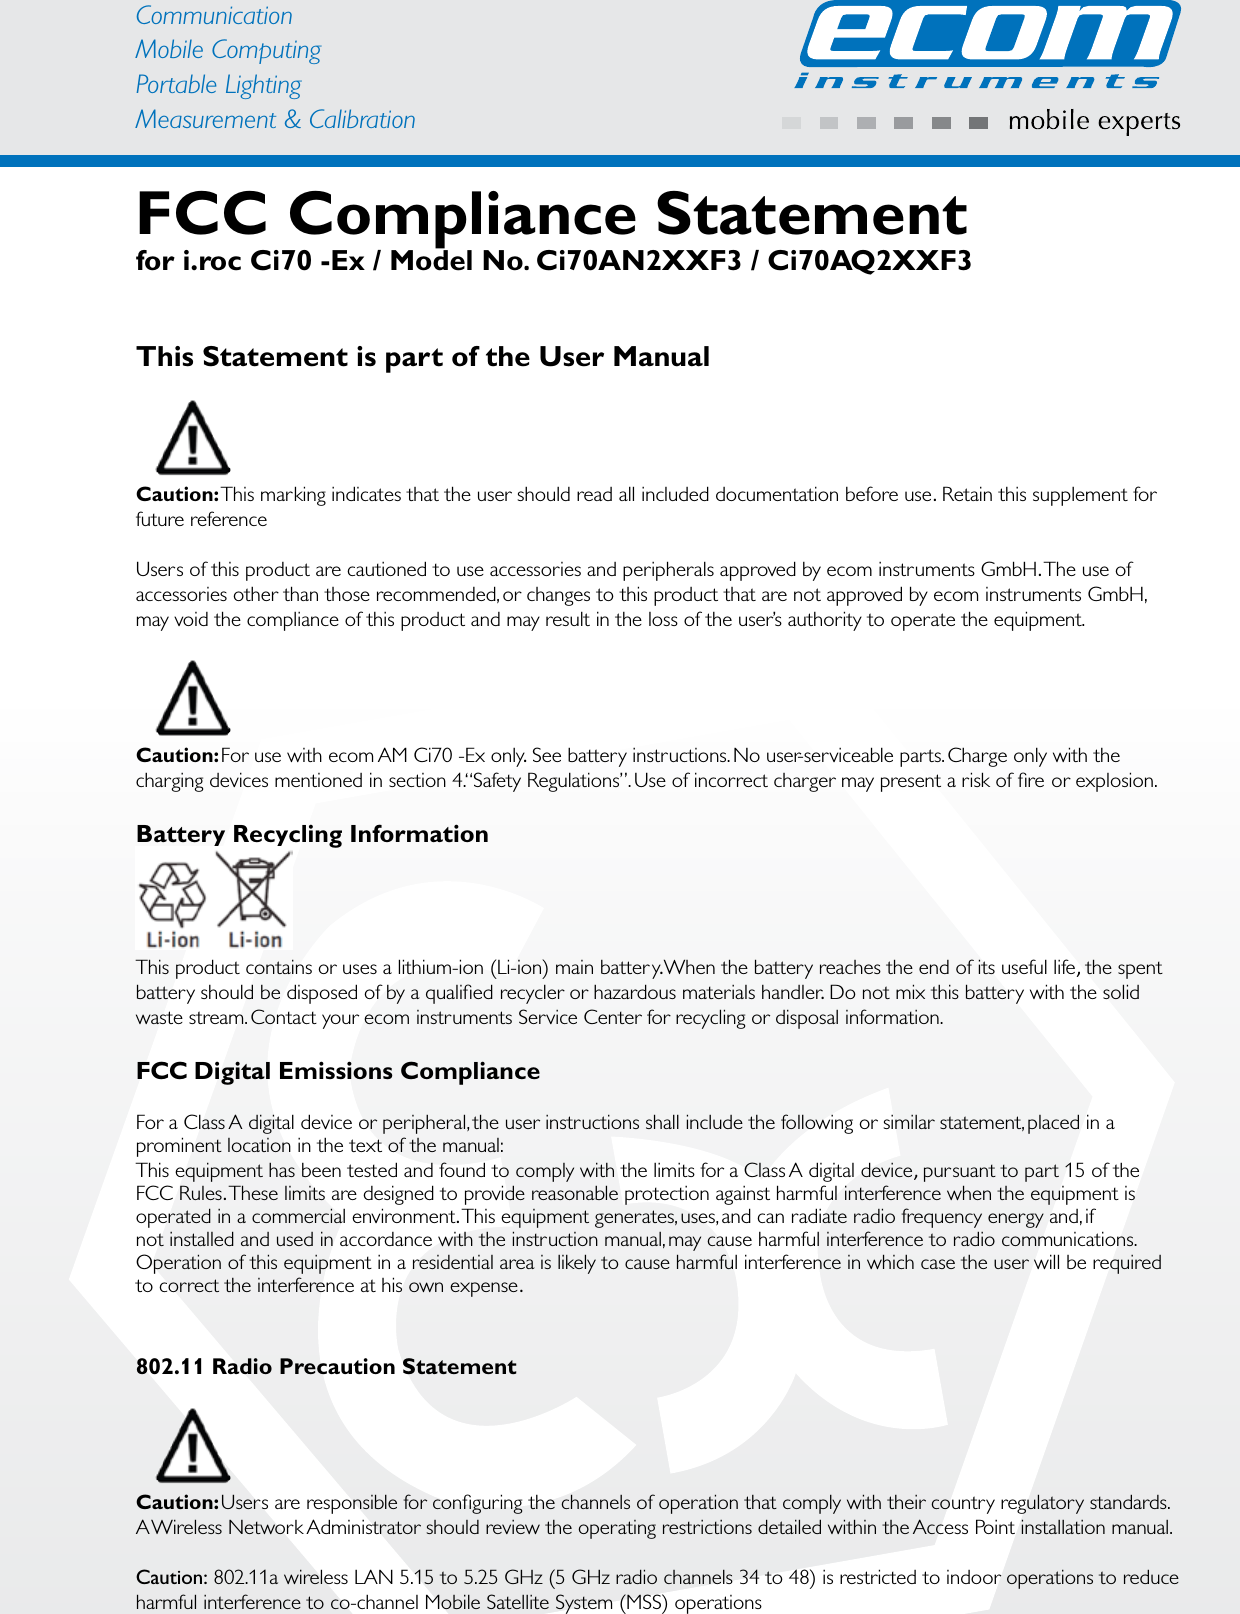 CommunicationMobile ComputingPortable Lighting Measurement &amp; CalibrationFCC Compliance Statementfor i.roc Ci70 -Ex / Model No. Ci70AN2XXF3 / Ci70AQ2XXF3This Statement is part of the User ManualCaution: This marking indicates that the user should read all included documentation before use. Retain this supplement for future referenceUsers of this product are cautioned to use accessories and peripherals approved by ecom instruments GmbH.The use of accessories other than those recommended, or changes to this product that are not approved by ecom instruments GmbH, may void the compliance of this product and may result in the loss of the user’s authority to operate the equipment.Caution: For use with ecom AM Ci70 -Ex only. See batter y instructions. No user-serviceable par ts. Charge only with the charging devices mentioned in section 4. “Safety Regulations”. Use of incorrect charger may present a risk of ﬁre or explosion.Battery Recycling InformationThis product contains or uses a lithium-ion (Li-ion) main battery. When the batter y reaches the end of its useful life, the spent batter y should be disposed of by a qualiﬁed recycler or hazardous materials handler. Do not mix this batter y with the solid waste stream. Contact your ecom instruments Ser vice Center for recycling or disposal information.FCC Digital Emissions ComplianceFor a Class A digital device or peripheral, the user instructions shall include the following or similar statement, placed in a prominent location in the text of the manual:This equipment has been tested and found to comply with the limits for a Class A digital device, pursuant to par t 15 of theFCC Rules.These limits are designed to provide reasonable protection against harmful interference when the equipment is operated in a commercial environment.This equipment generates, uses, and can radiate radio frequency energy and, ifnot installed and used in accordance with the instruction manual, may cause harmful interference to radio communications. Operation of this equipment in a residential area is likely to cause harmful interference in which case the user will be required to correct the interference at his own expense.802.11 Radio Precaution StatementCaution: Users are responsible for conﬁguring the channels of operation that comply with their countr y regulator y standards. A Wireless Network Administrator should review the operating restrictions detailed within the Access Point installation manual.Caution: 802.11a wireless LAN 5.15 to 5.25 GHz (5 GHz radio channels 34 to 48) is restricted to indoor operations to reduce harmful interference to co-channel Mobile Satellite System (MSS) operations